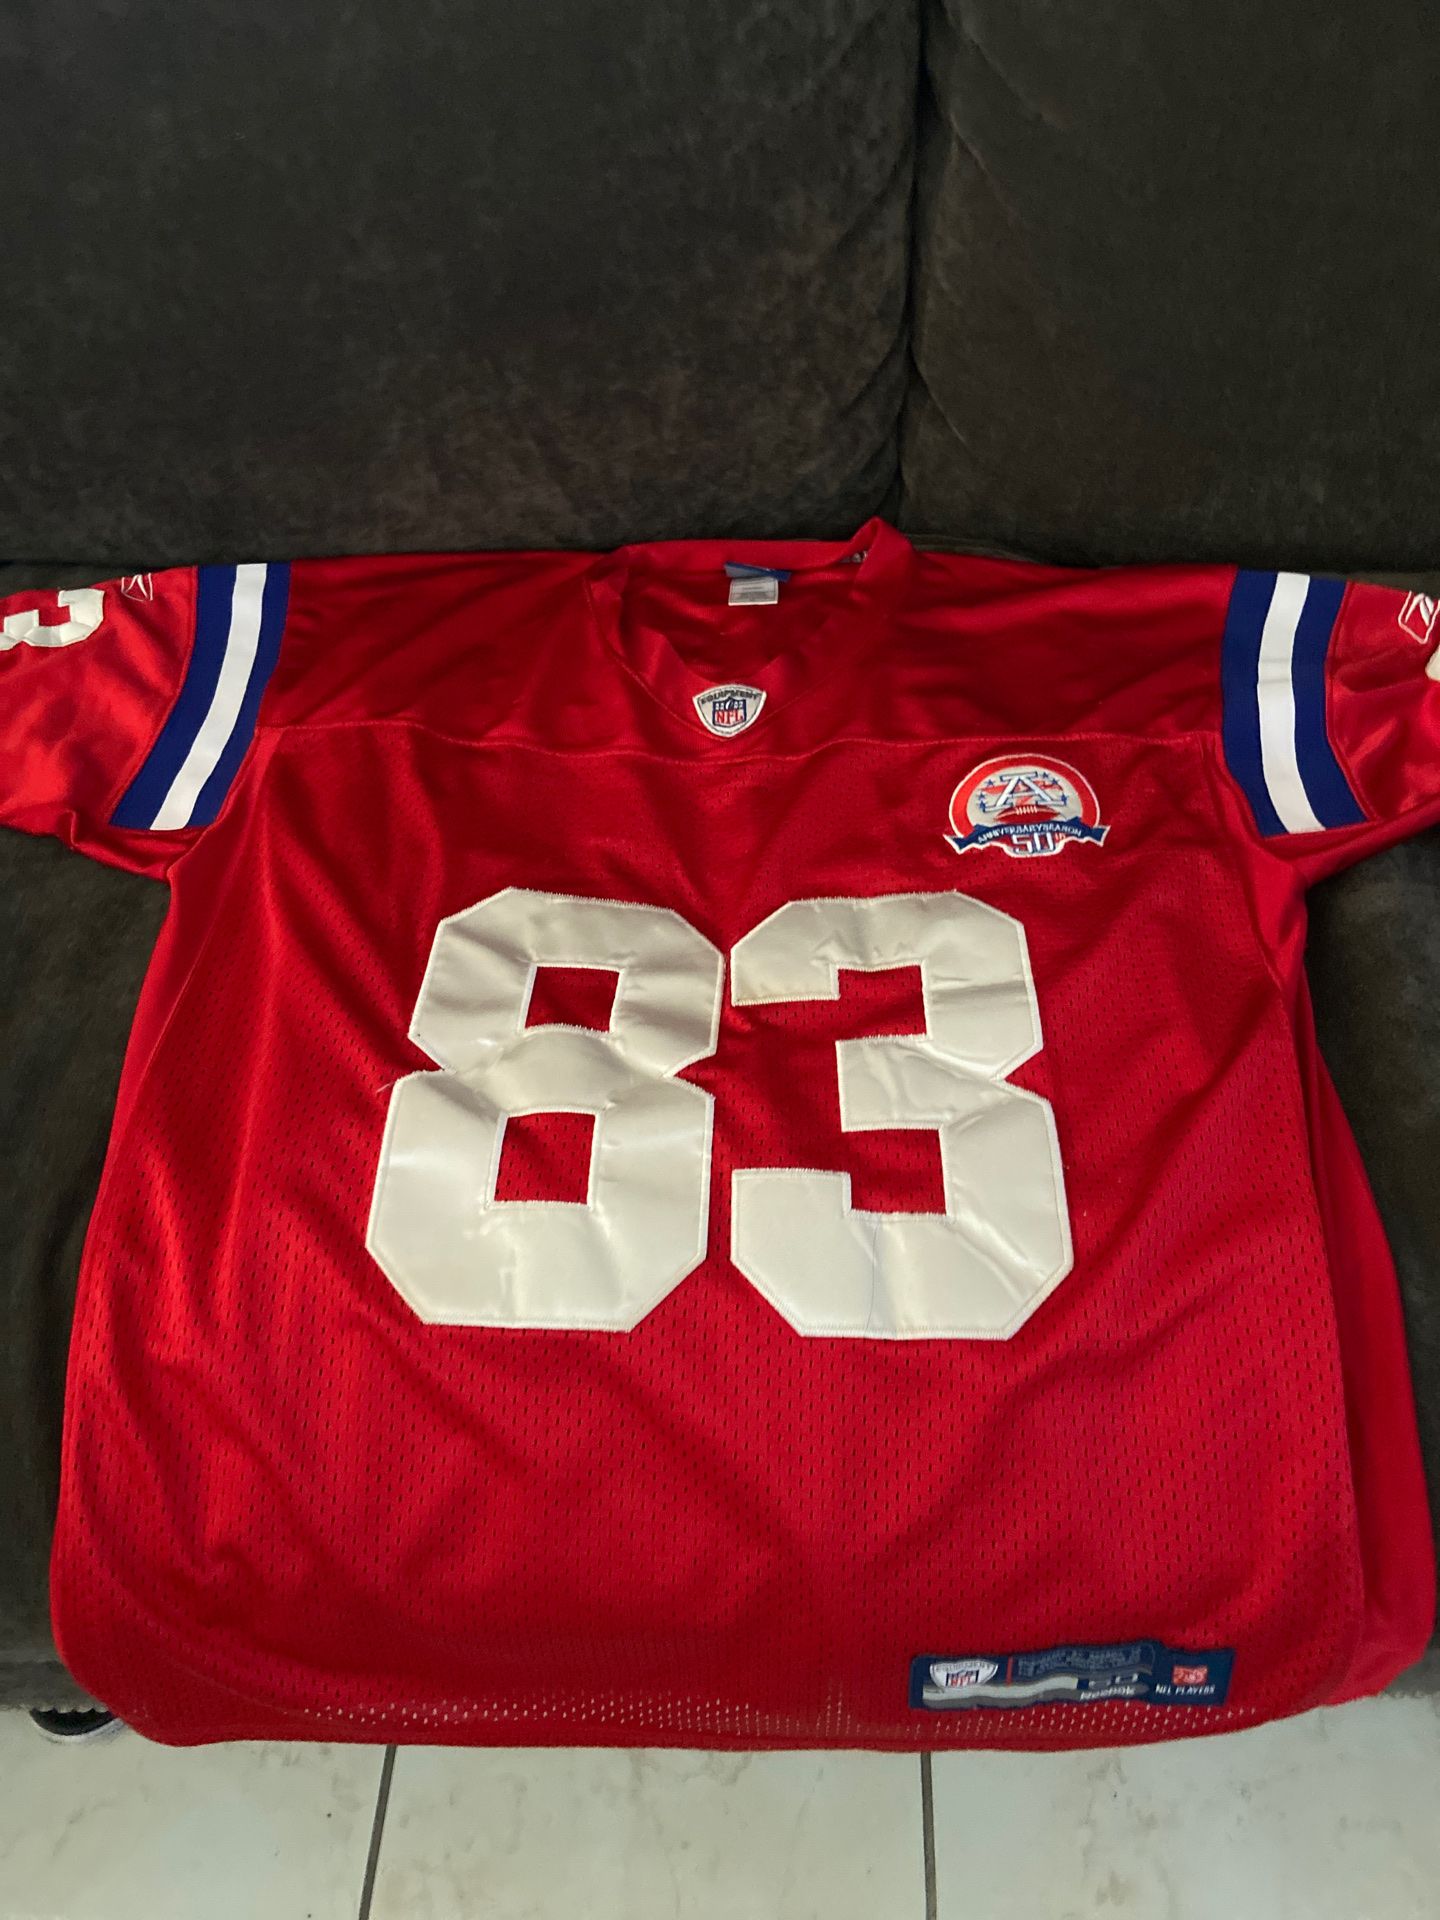 Wes Welker 50th anniversary Patriots jersey